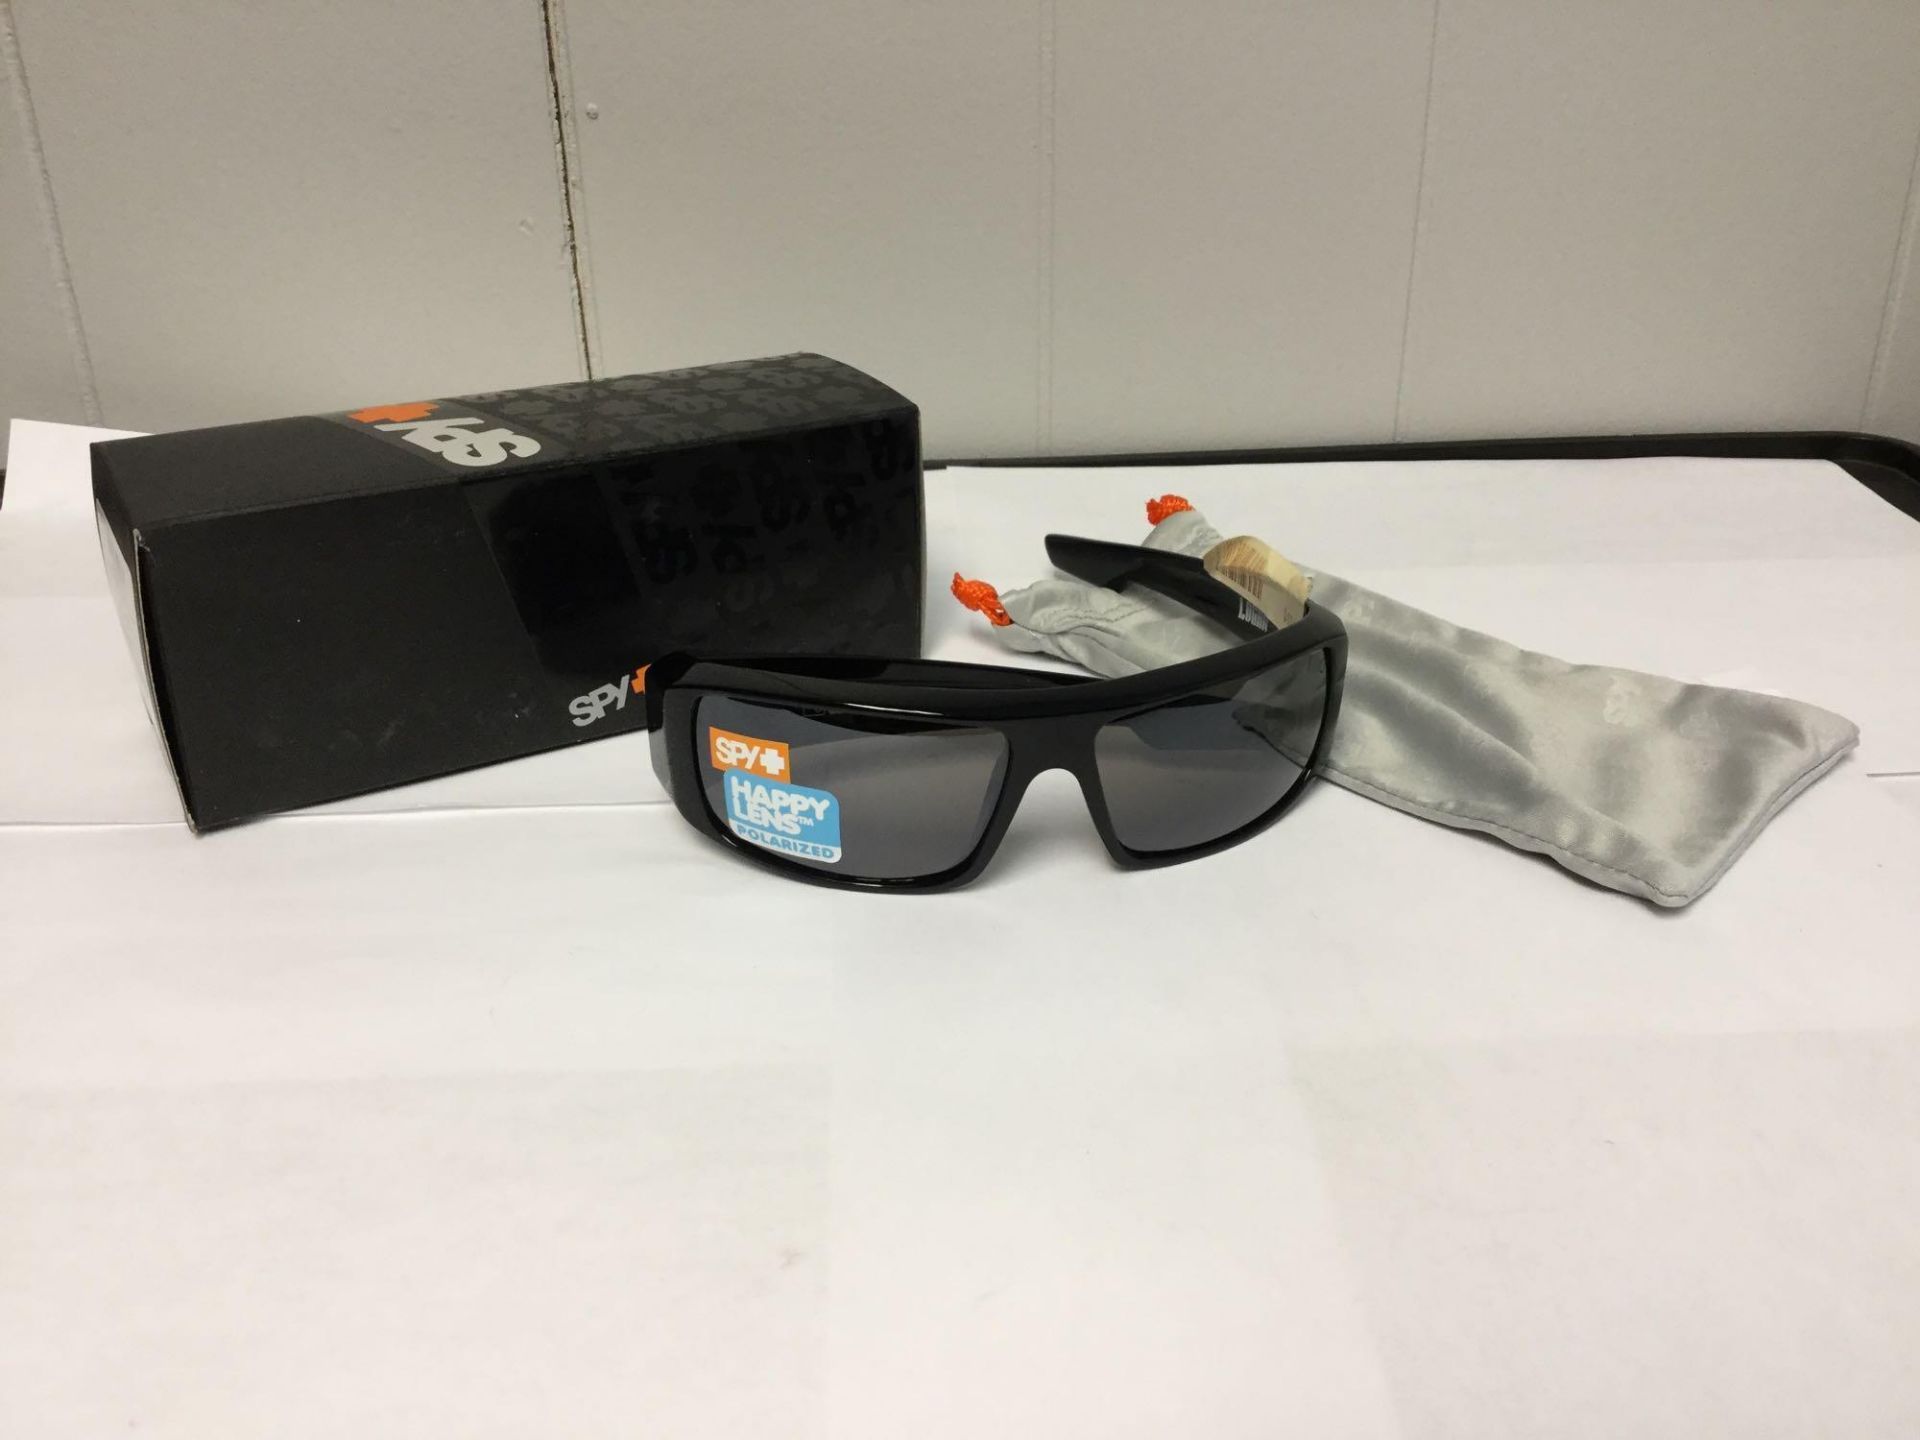 Spy Plus sunglasses with Box and bag Value $175